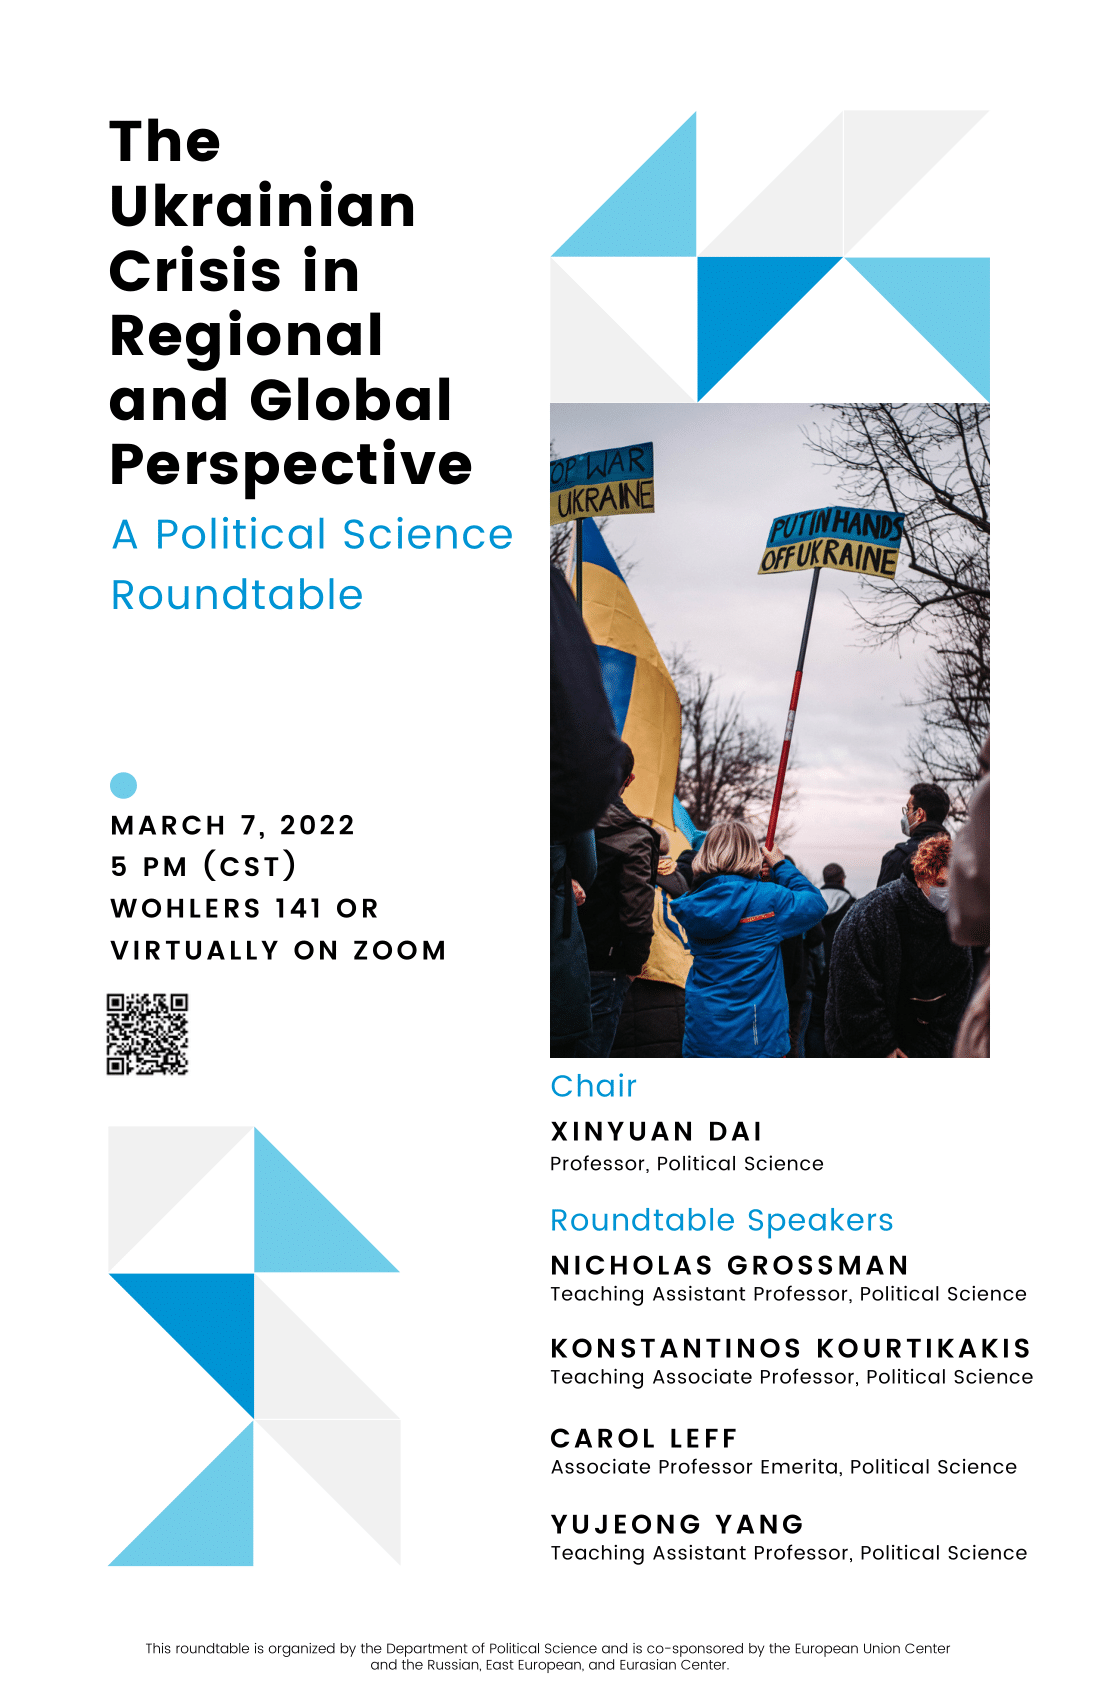 The Ukrainian Crisis in Regional and Global Perspective: A Political Science Roundtable